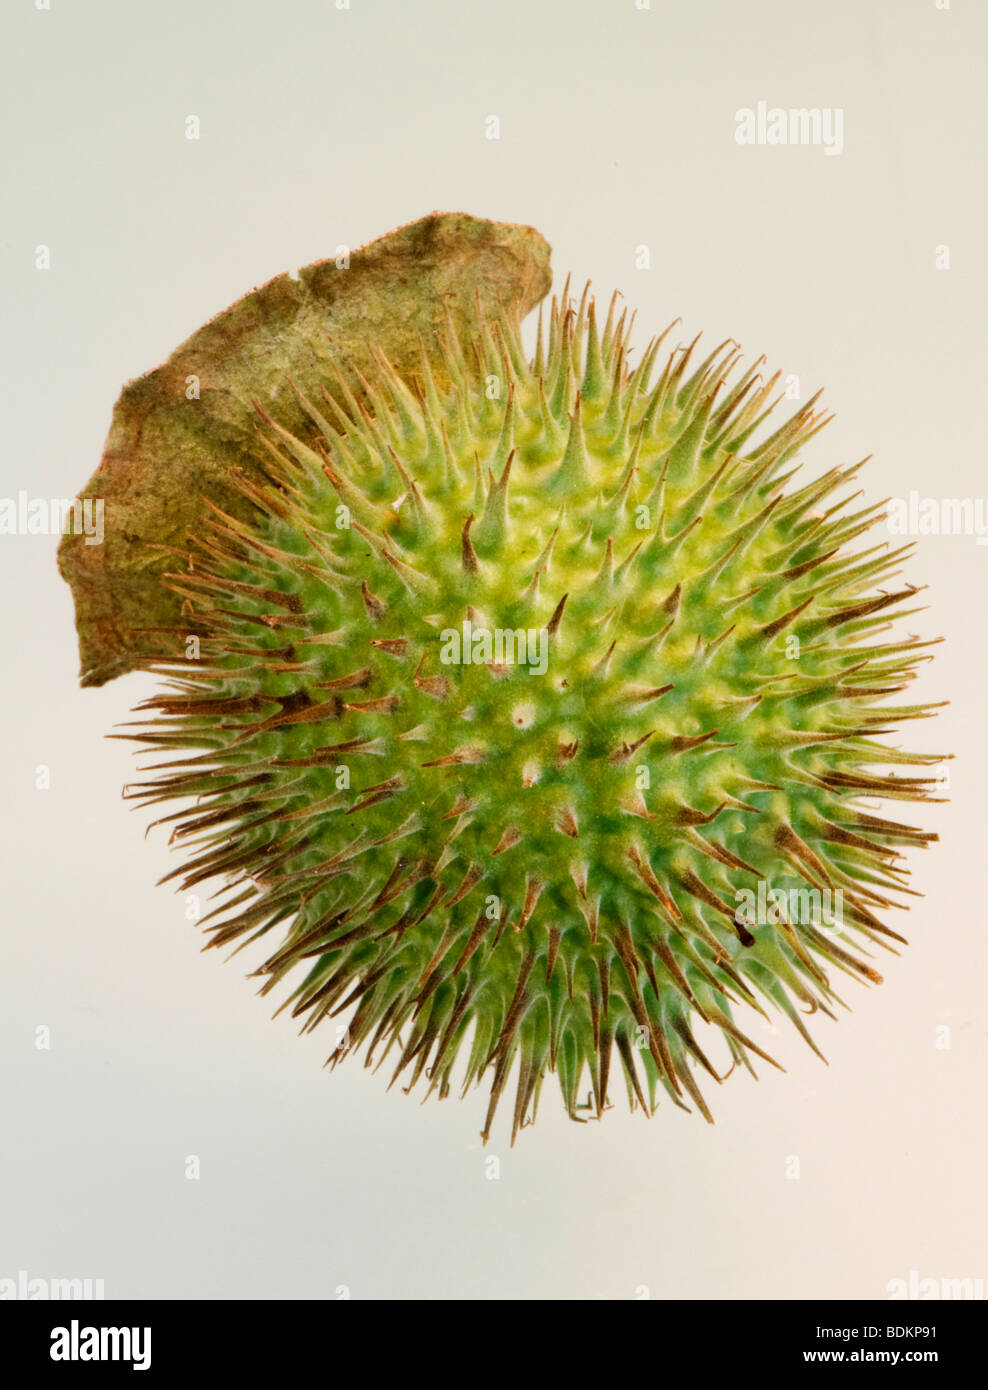 Prickly seed pod of Jimsonweed, a poisonous plant in the genus Datura Stock Photo